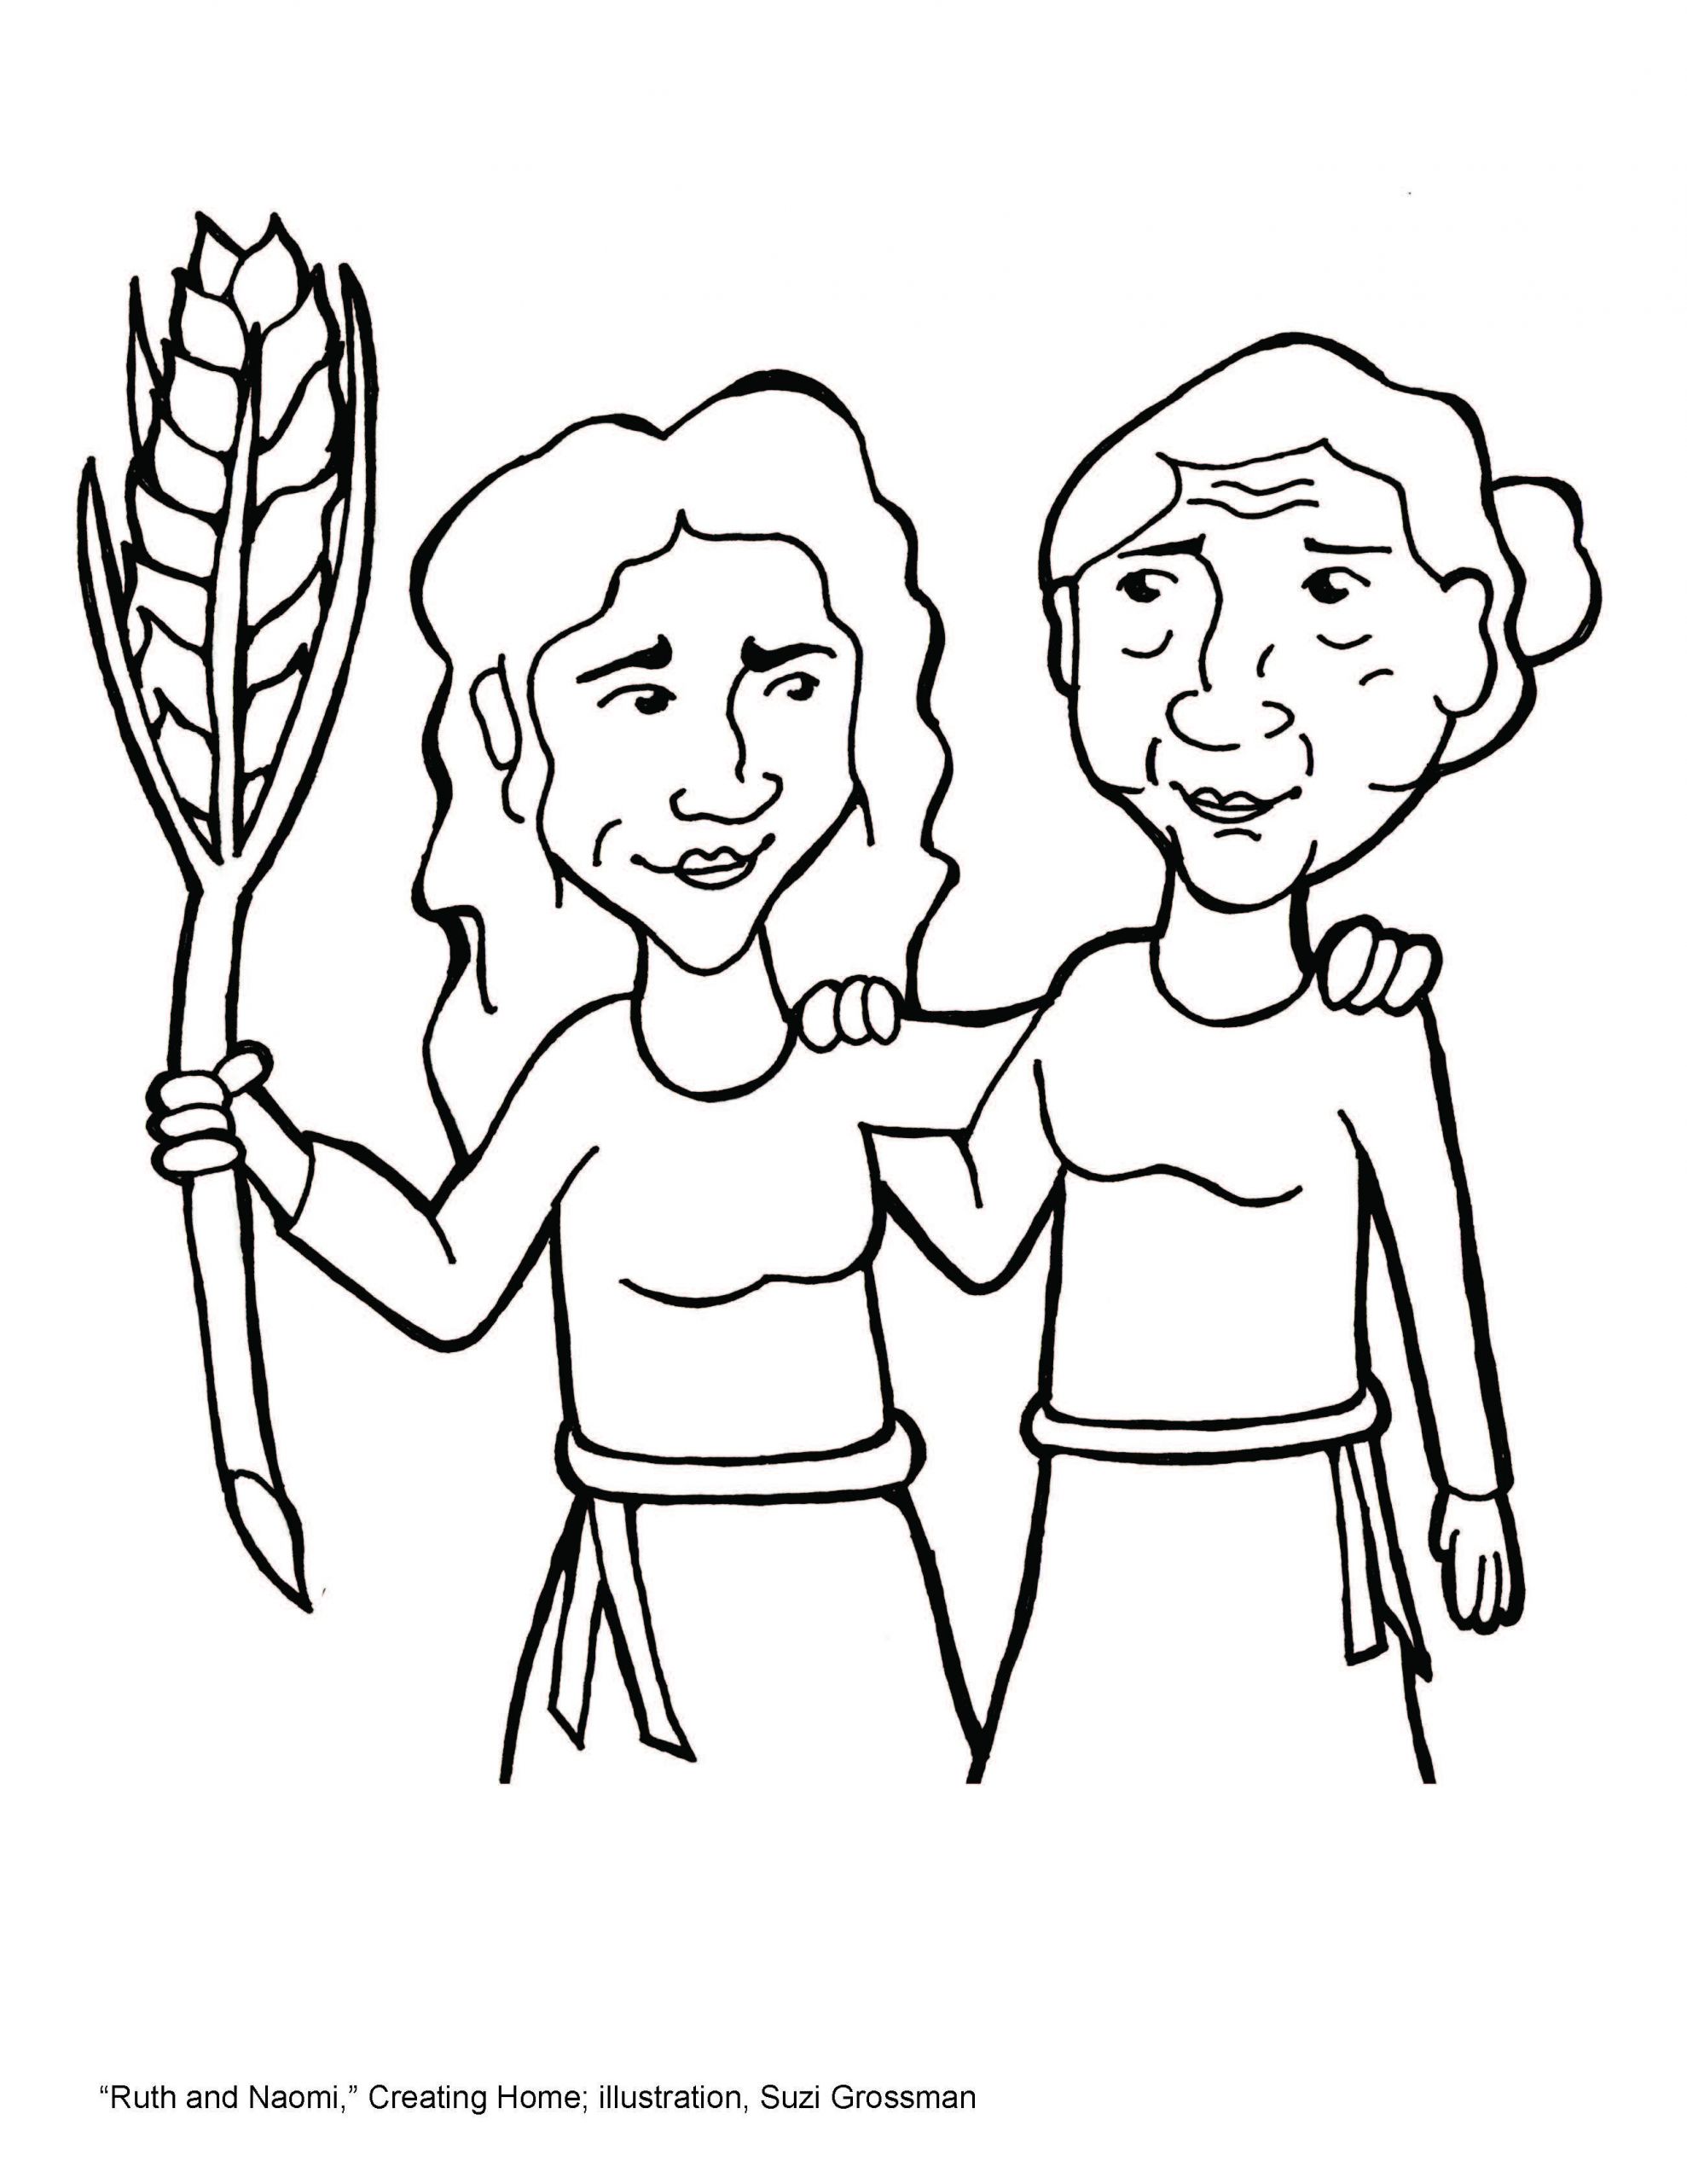 Coloring Pages For Children On The Story Of Ruth And Naomi
 Ruth and Naomi Creating Home Tapestry of Faith